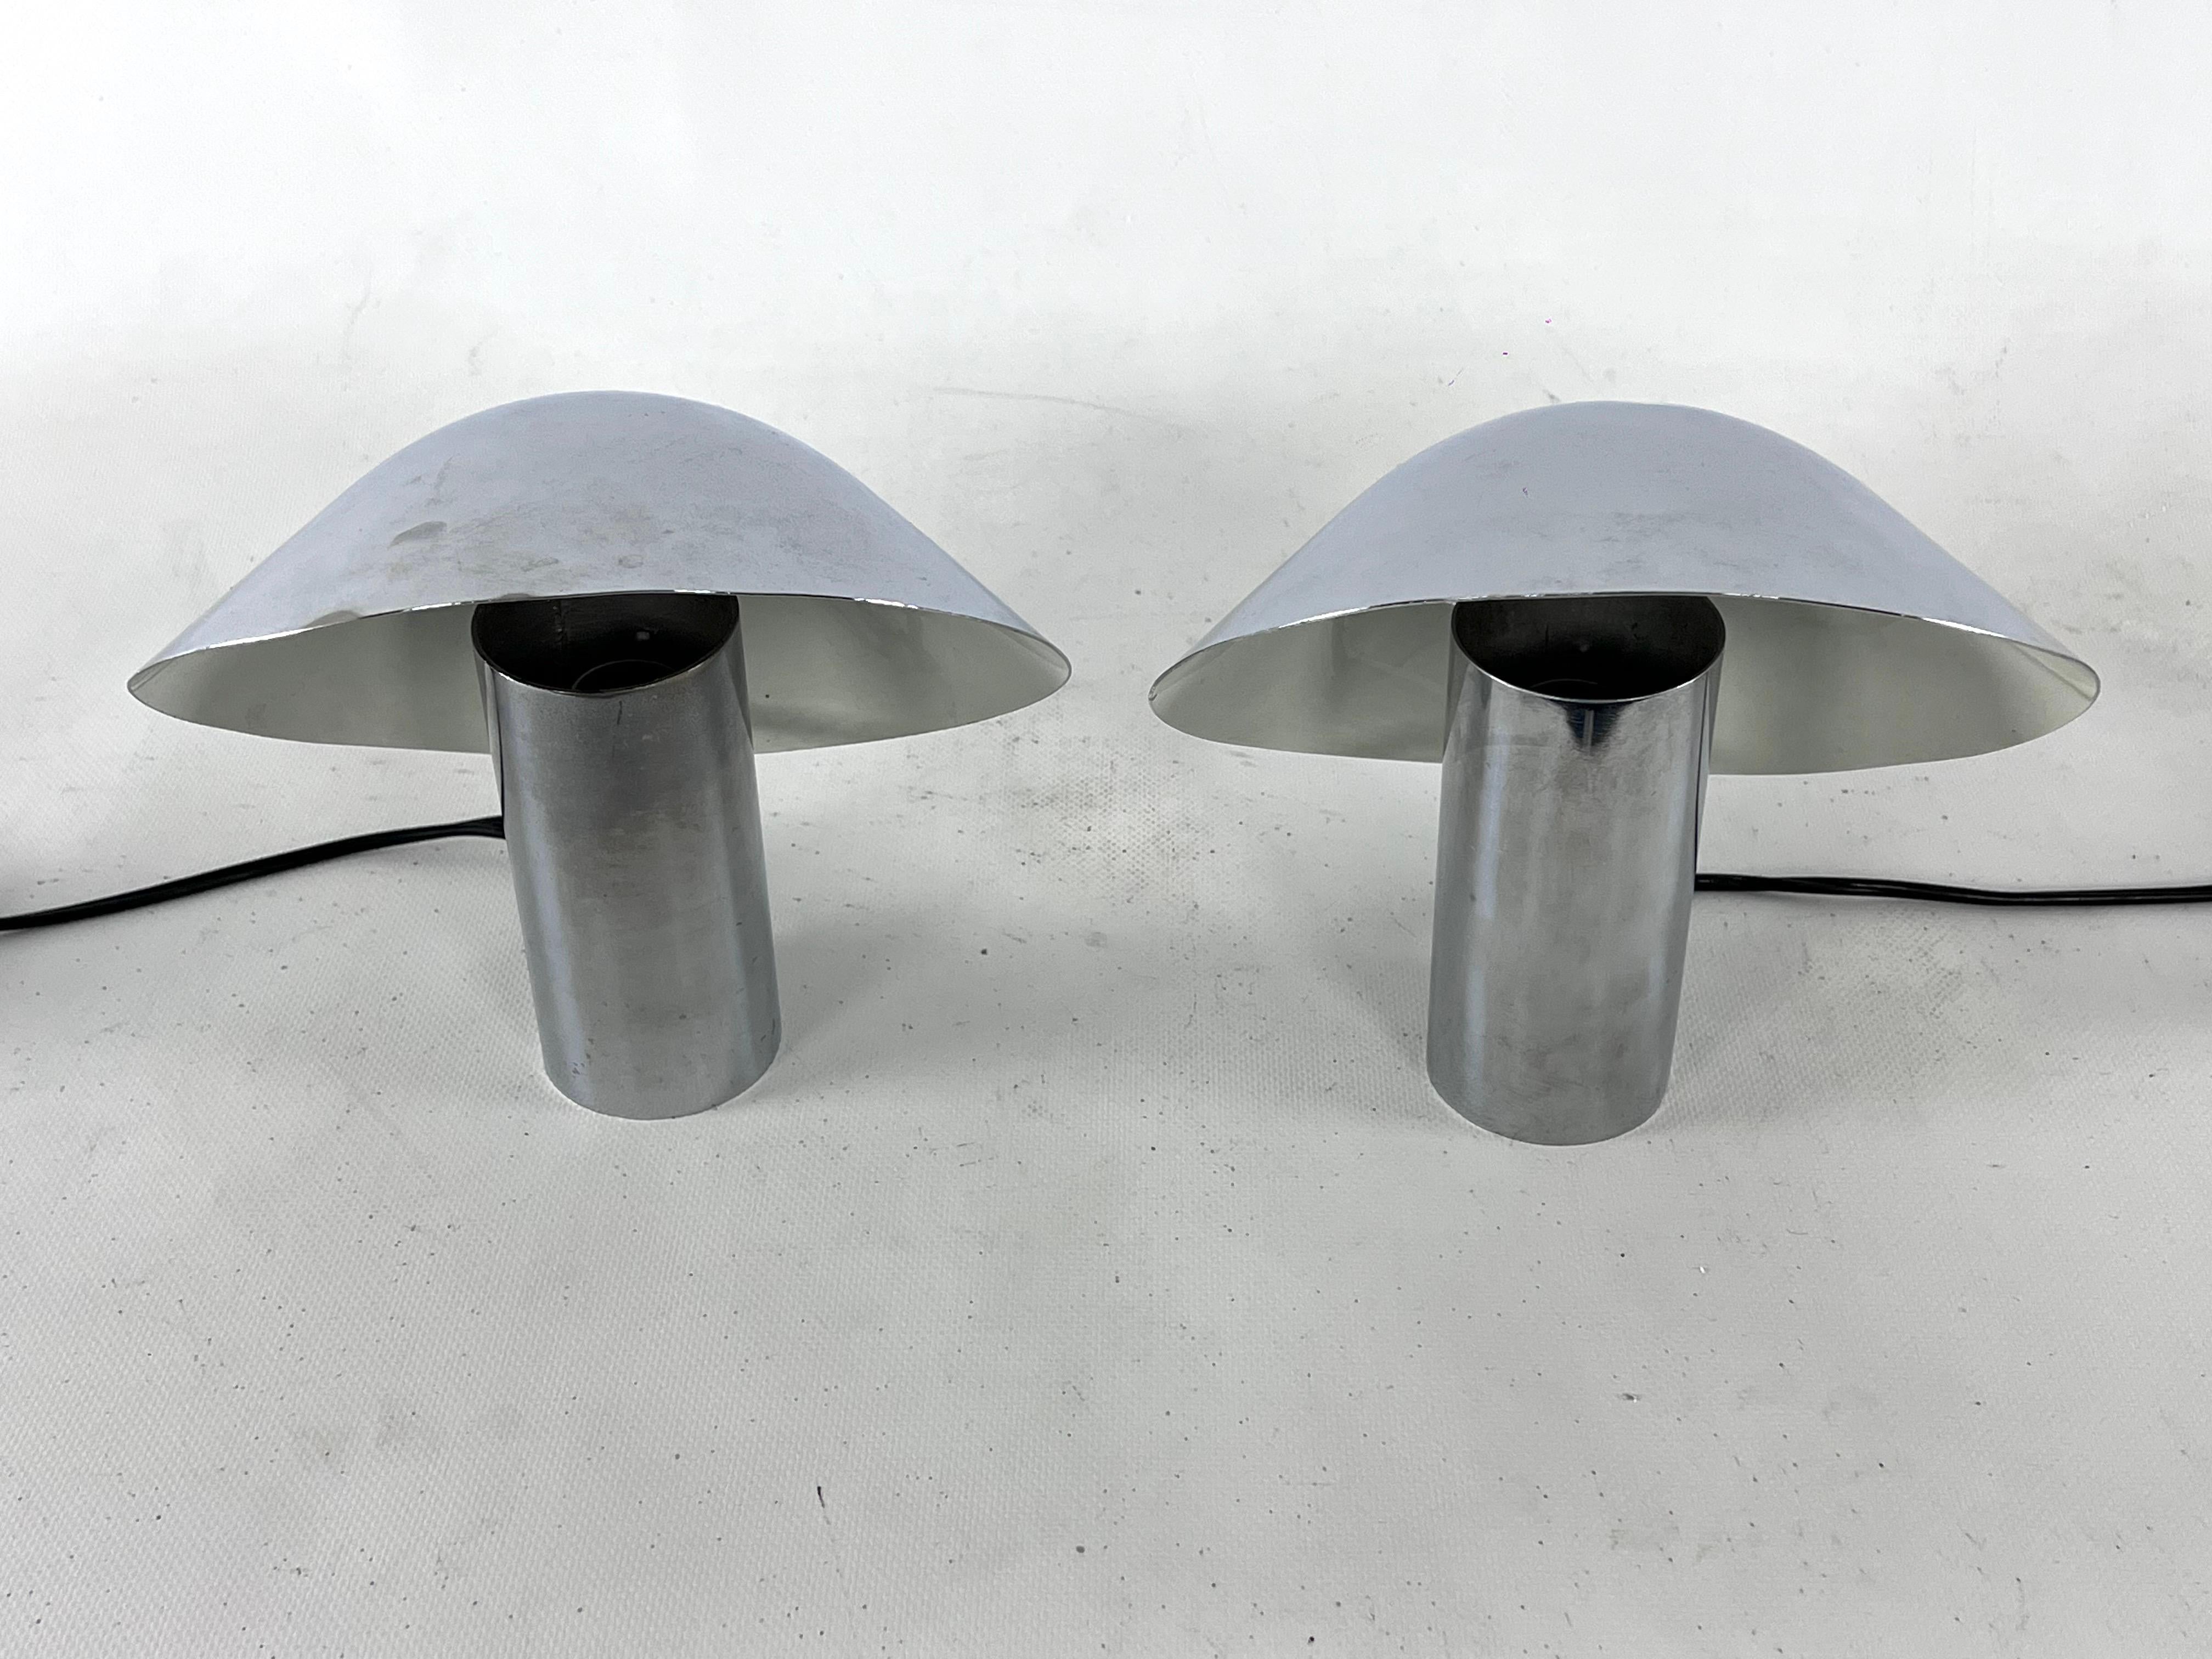 Mid-Century Modern Pair of Table Lamps by Sergio Mazza and Giuliana Gramigna for Quattrifolio 1970s For Sale